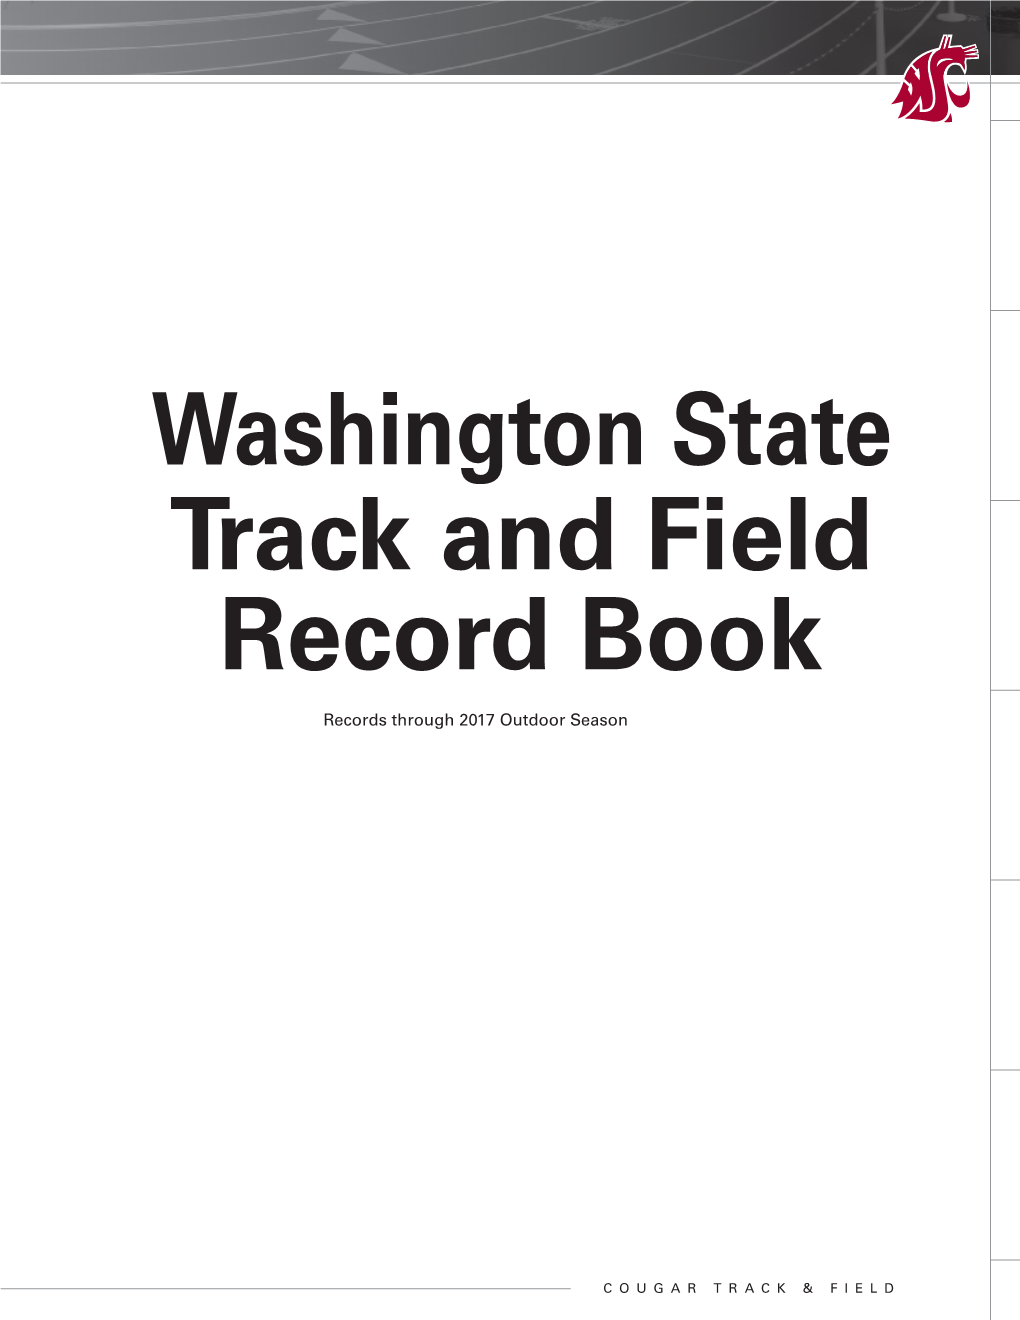 Washington State Track and Field Record Book